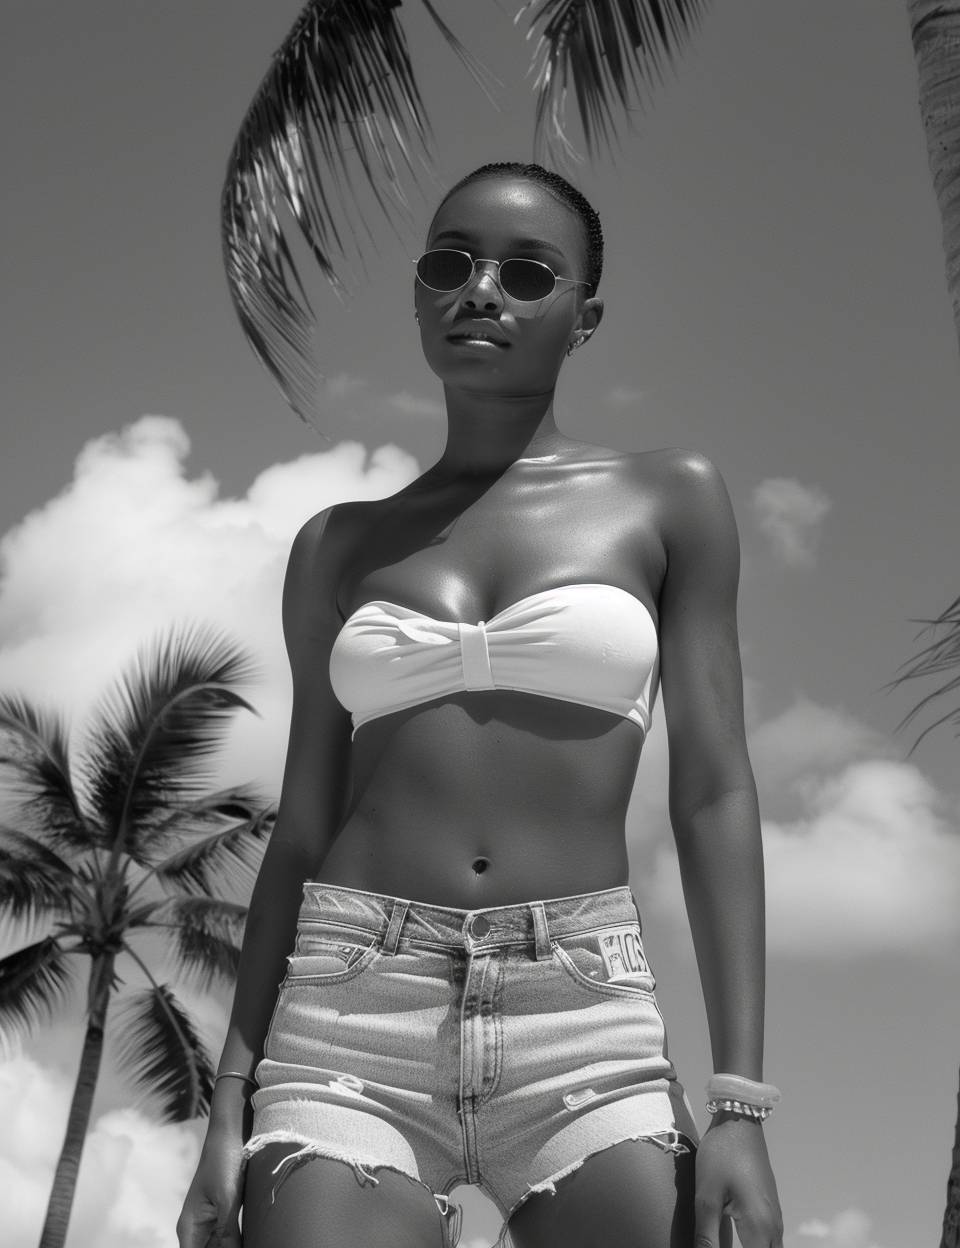 Impudent summer fashion. Very Low angle black and white photo of an African woman wearing denim shorts and sunglasses, standing in the middle of palm trees on a tropical island, sky background, low-angle shot, dynamic pose, natural lighting, full body shot.